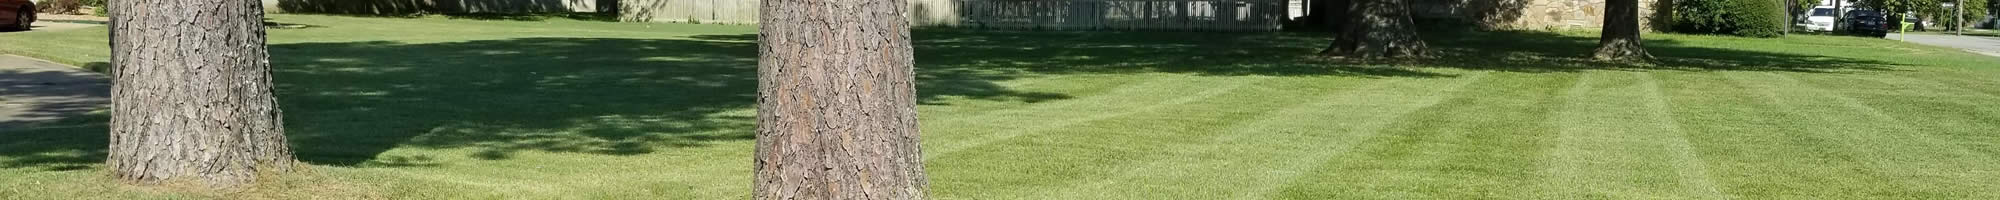 Lawn Care Landscaping Services Poplar Bluff